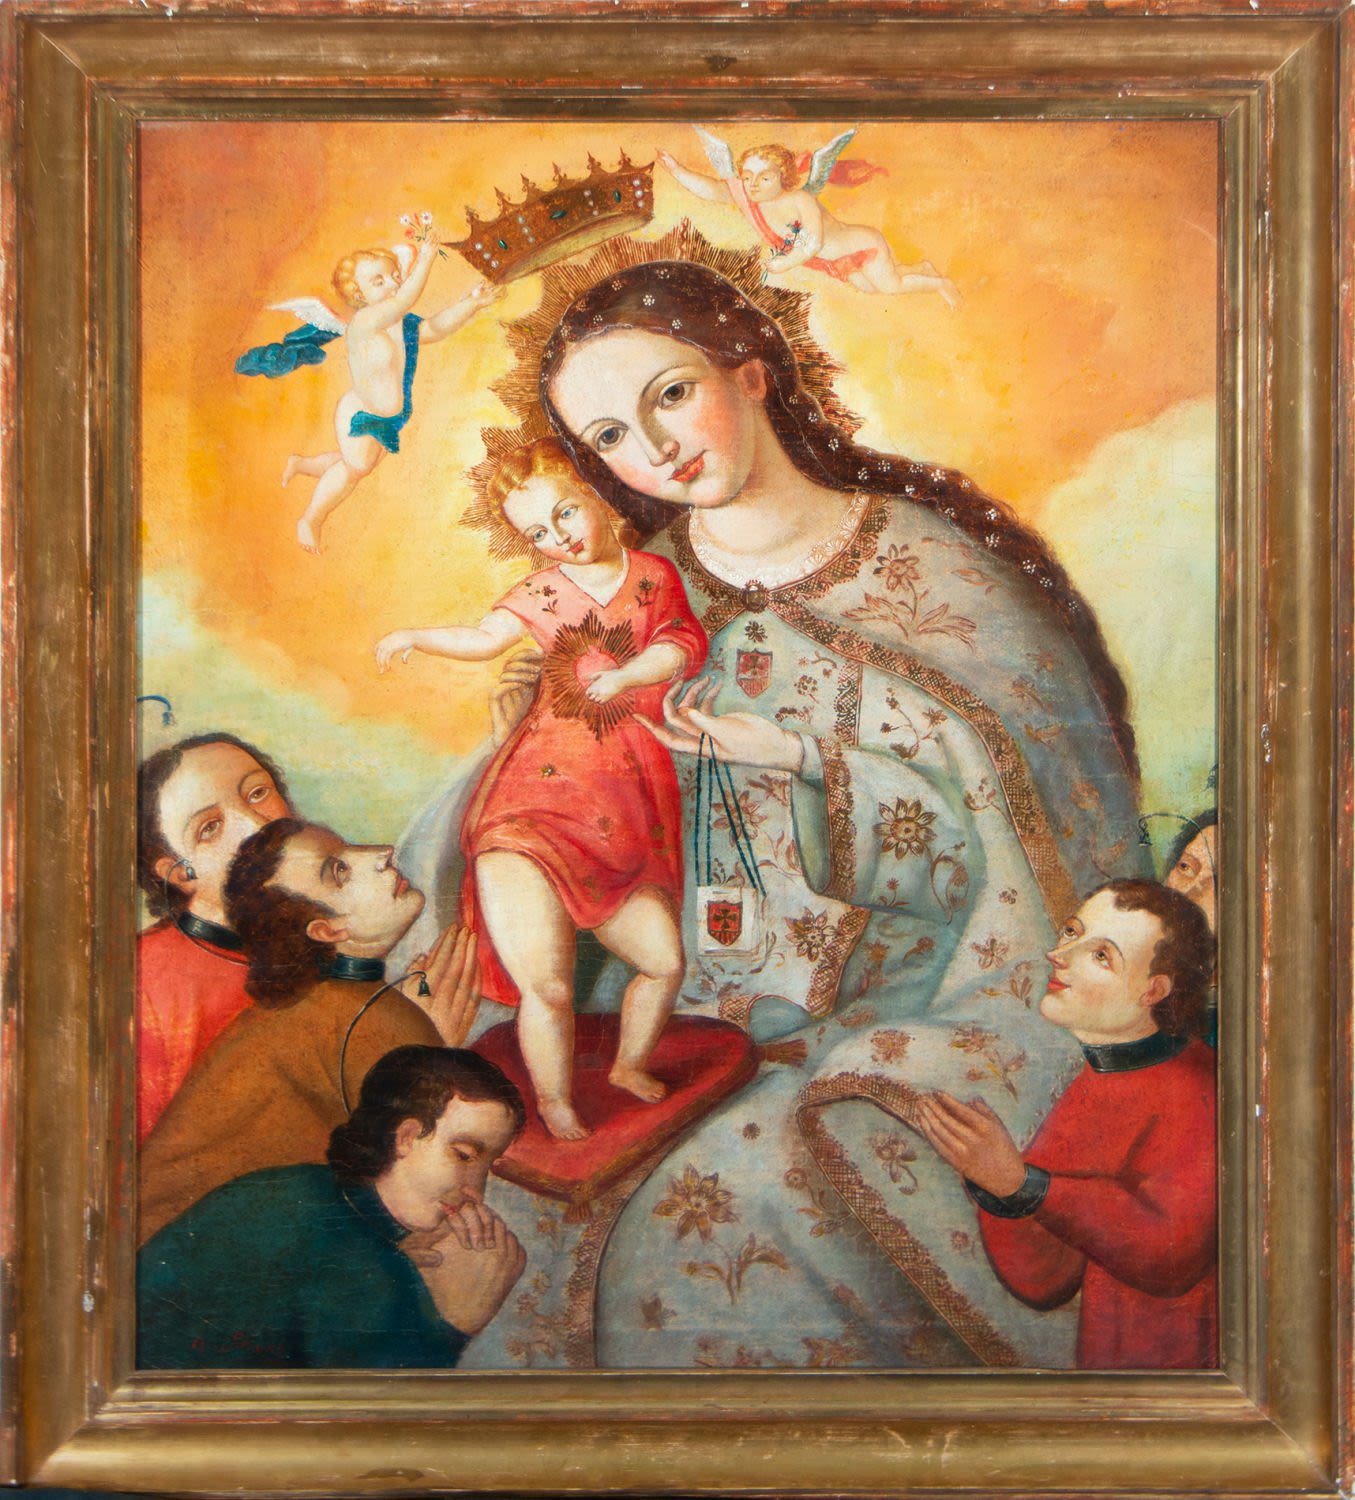 Crowned Virgin with Child in her arms surrounded by Donors, Cuzco Colonial school from the 17th cent